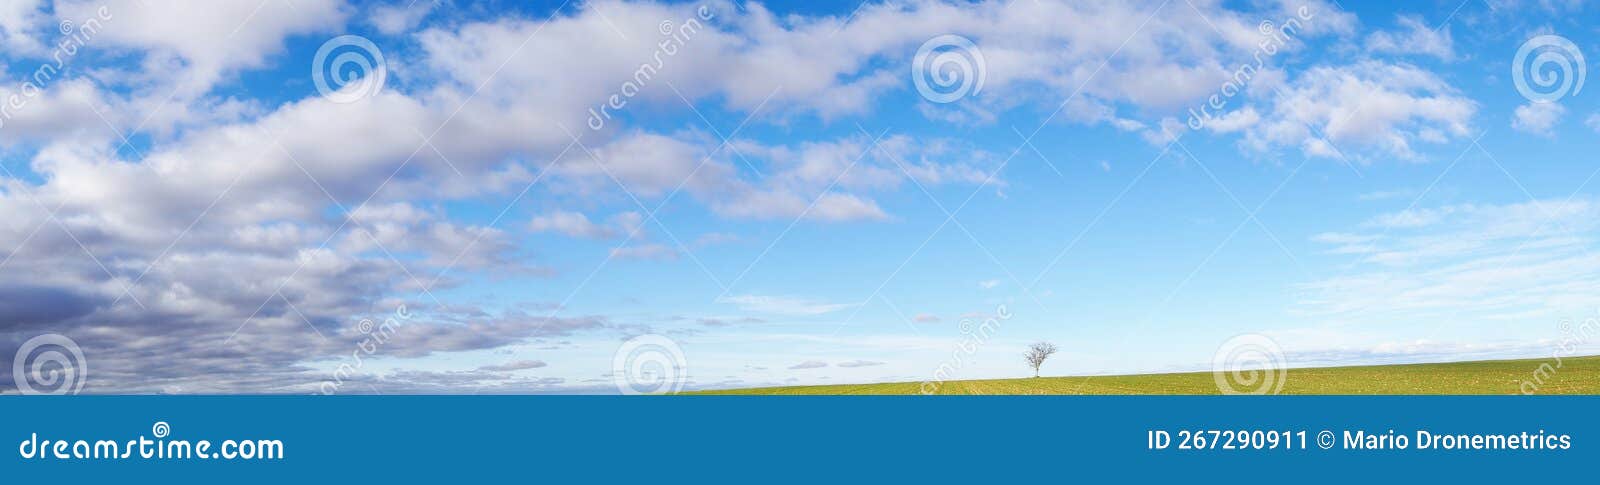 wide panoramic view of blue skies and white scattered clouds and green ground with a single tree